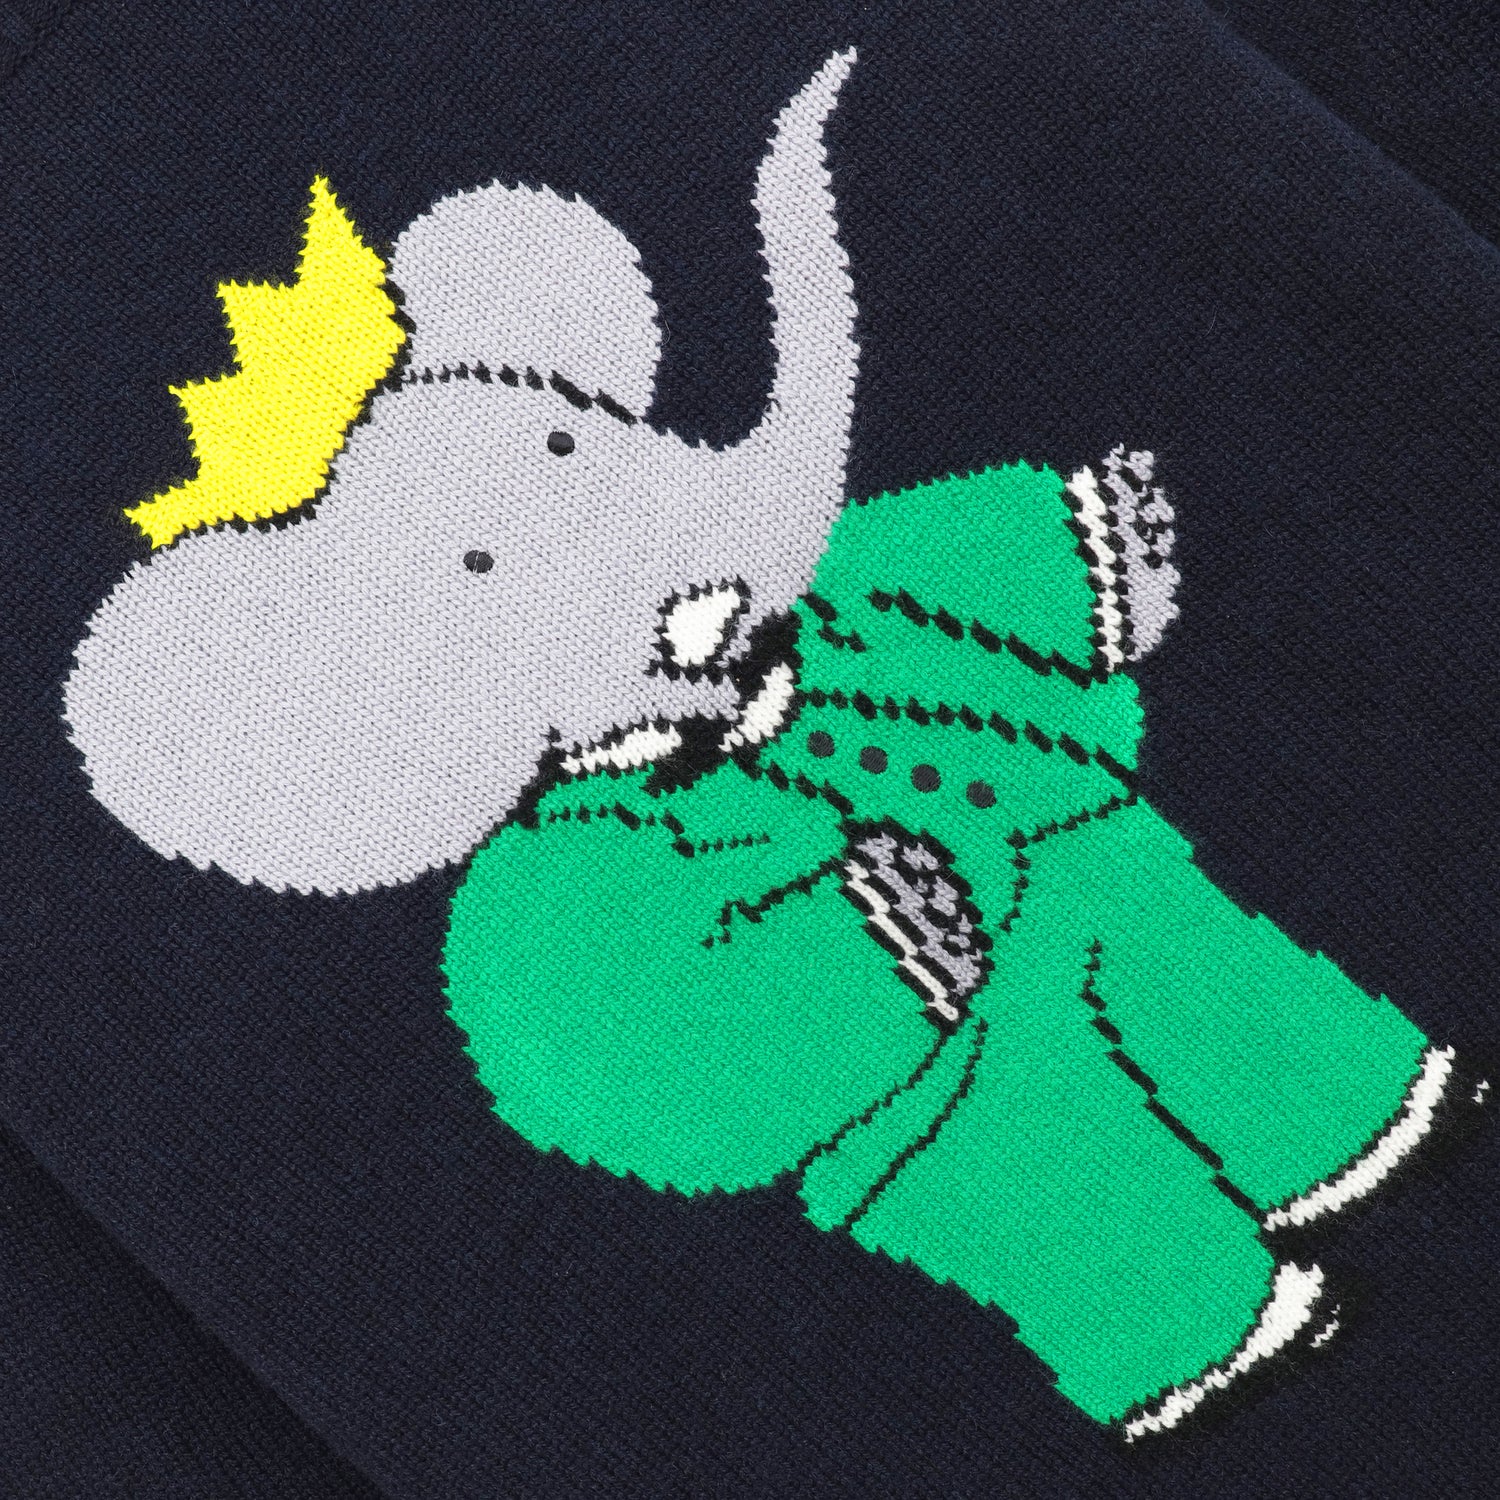 Detail of intarsia depiction of Babar the elephant.